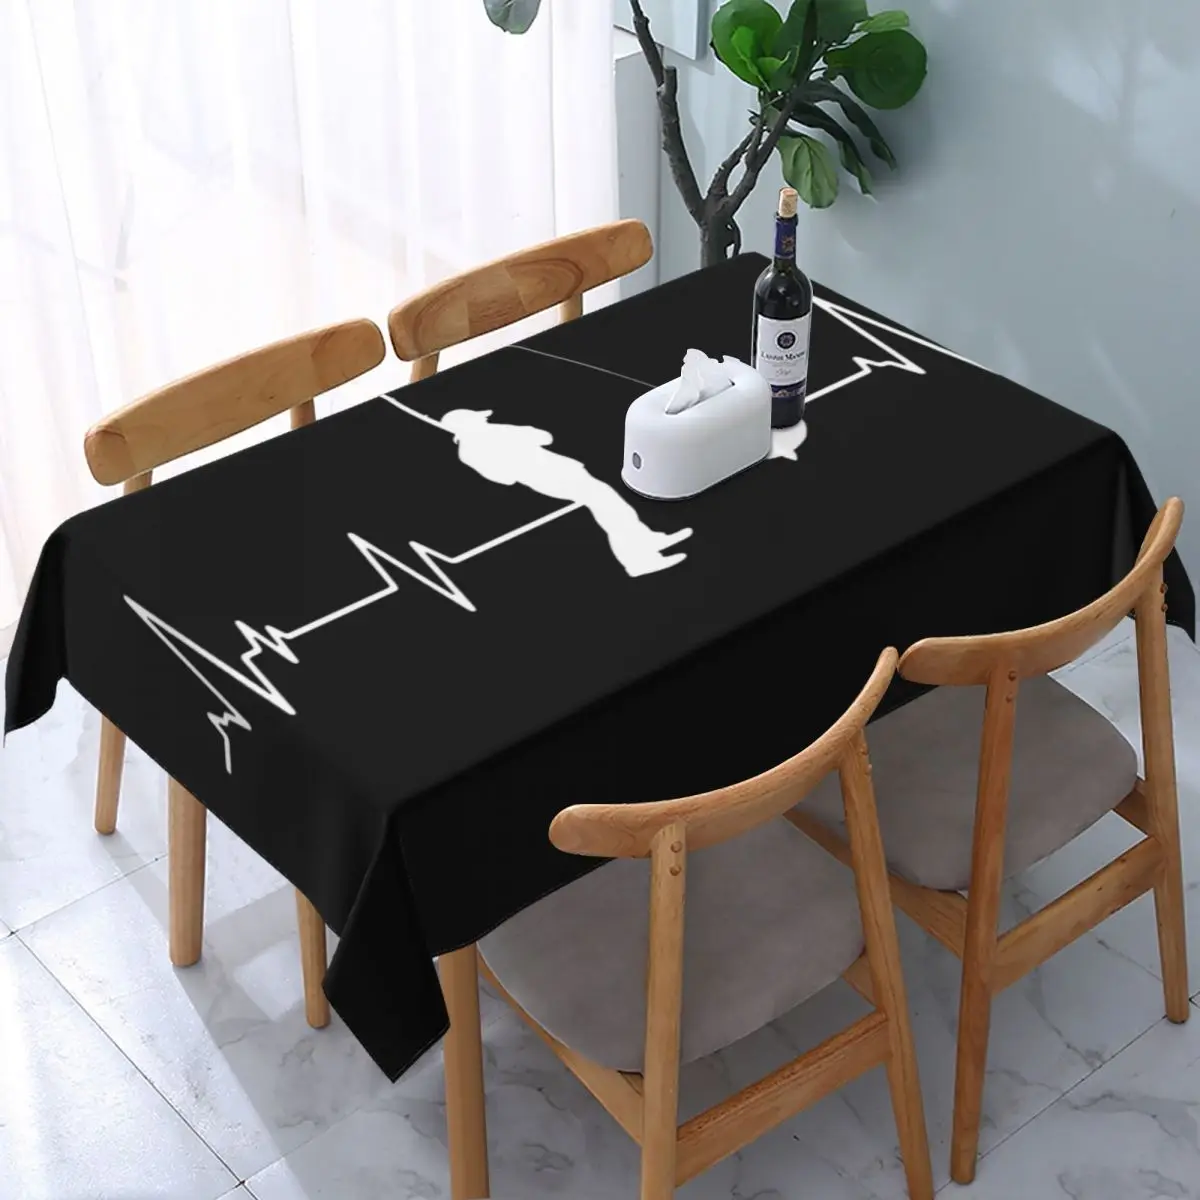 

Rectangular Oilproof Angler Fishing Heartbeat Table Cover Elastic Fisherman Fish Table Cloth Backing Edge Tablecloth for Dining